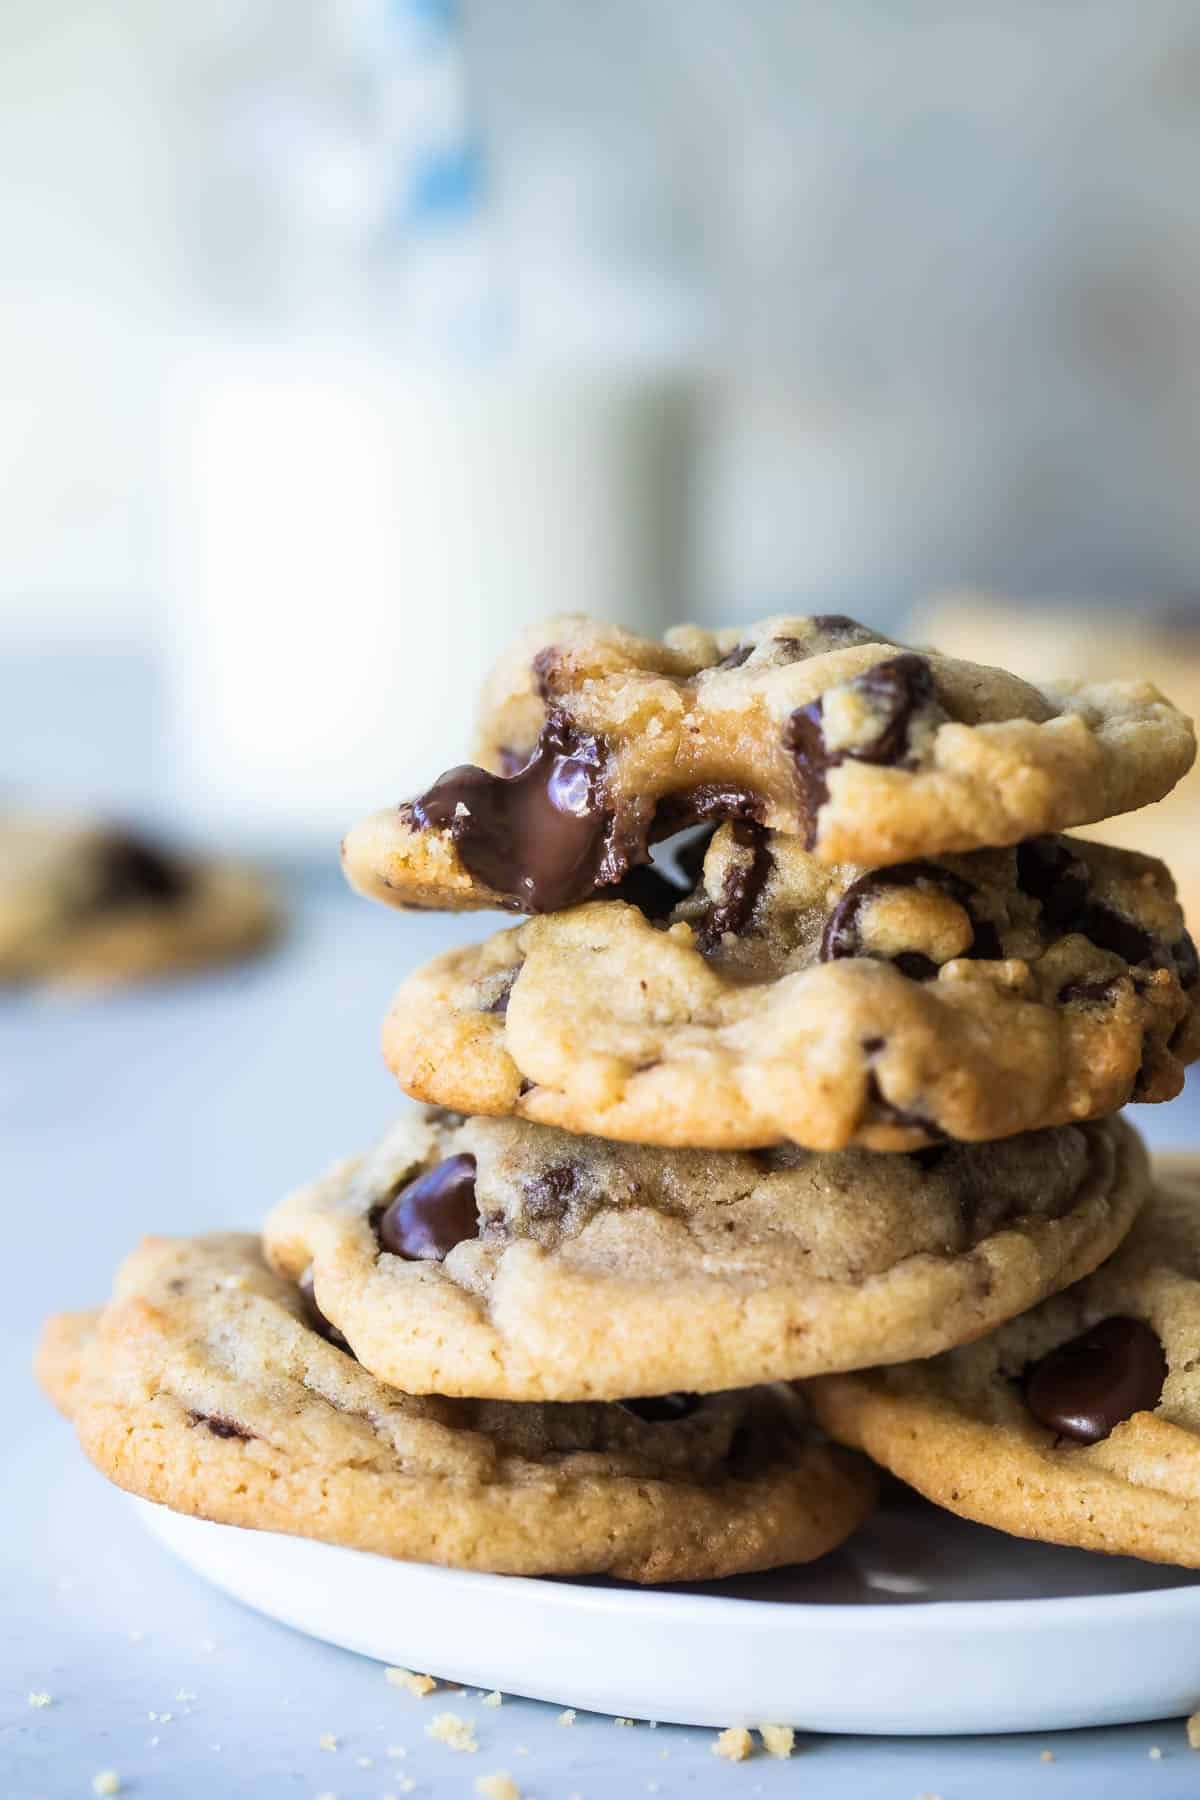 A stack of gooey chocolate chip cookies on a white plate.